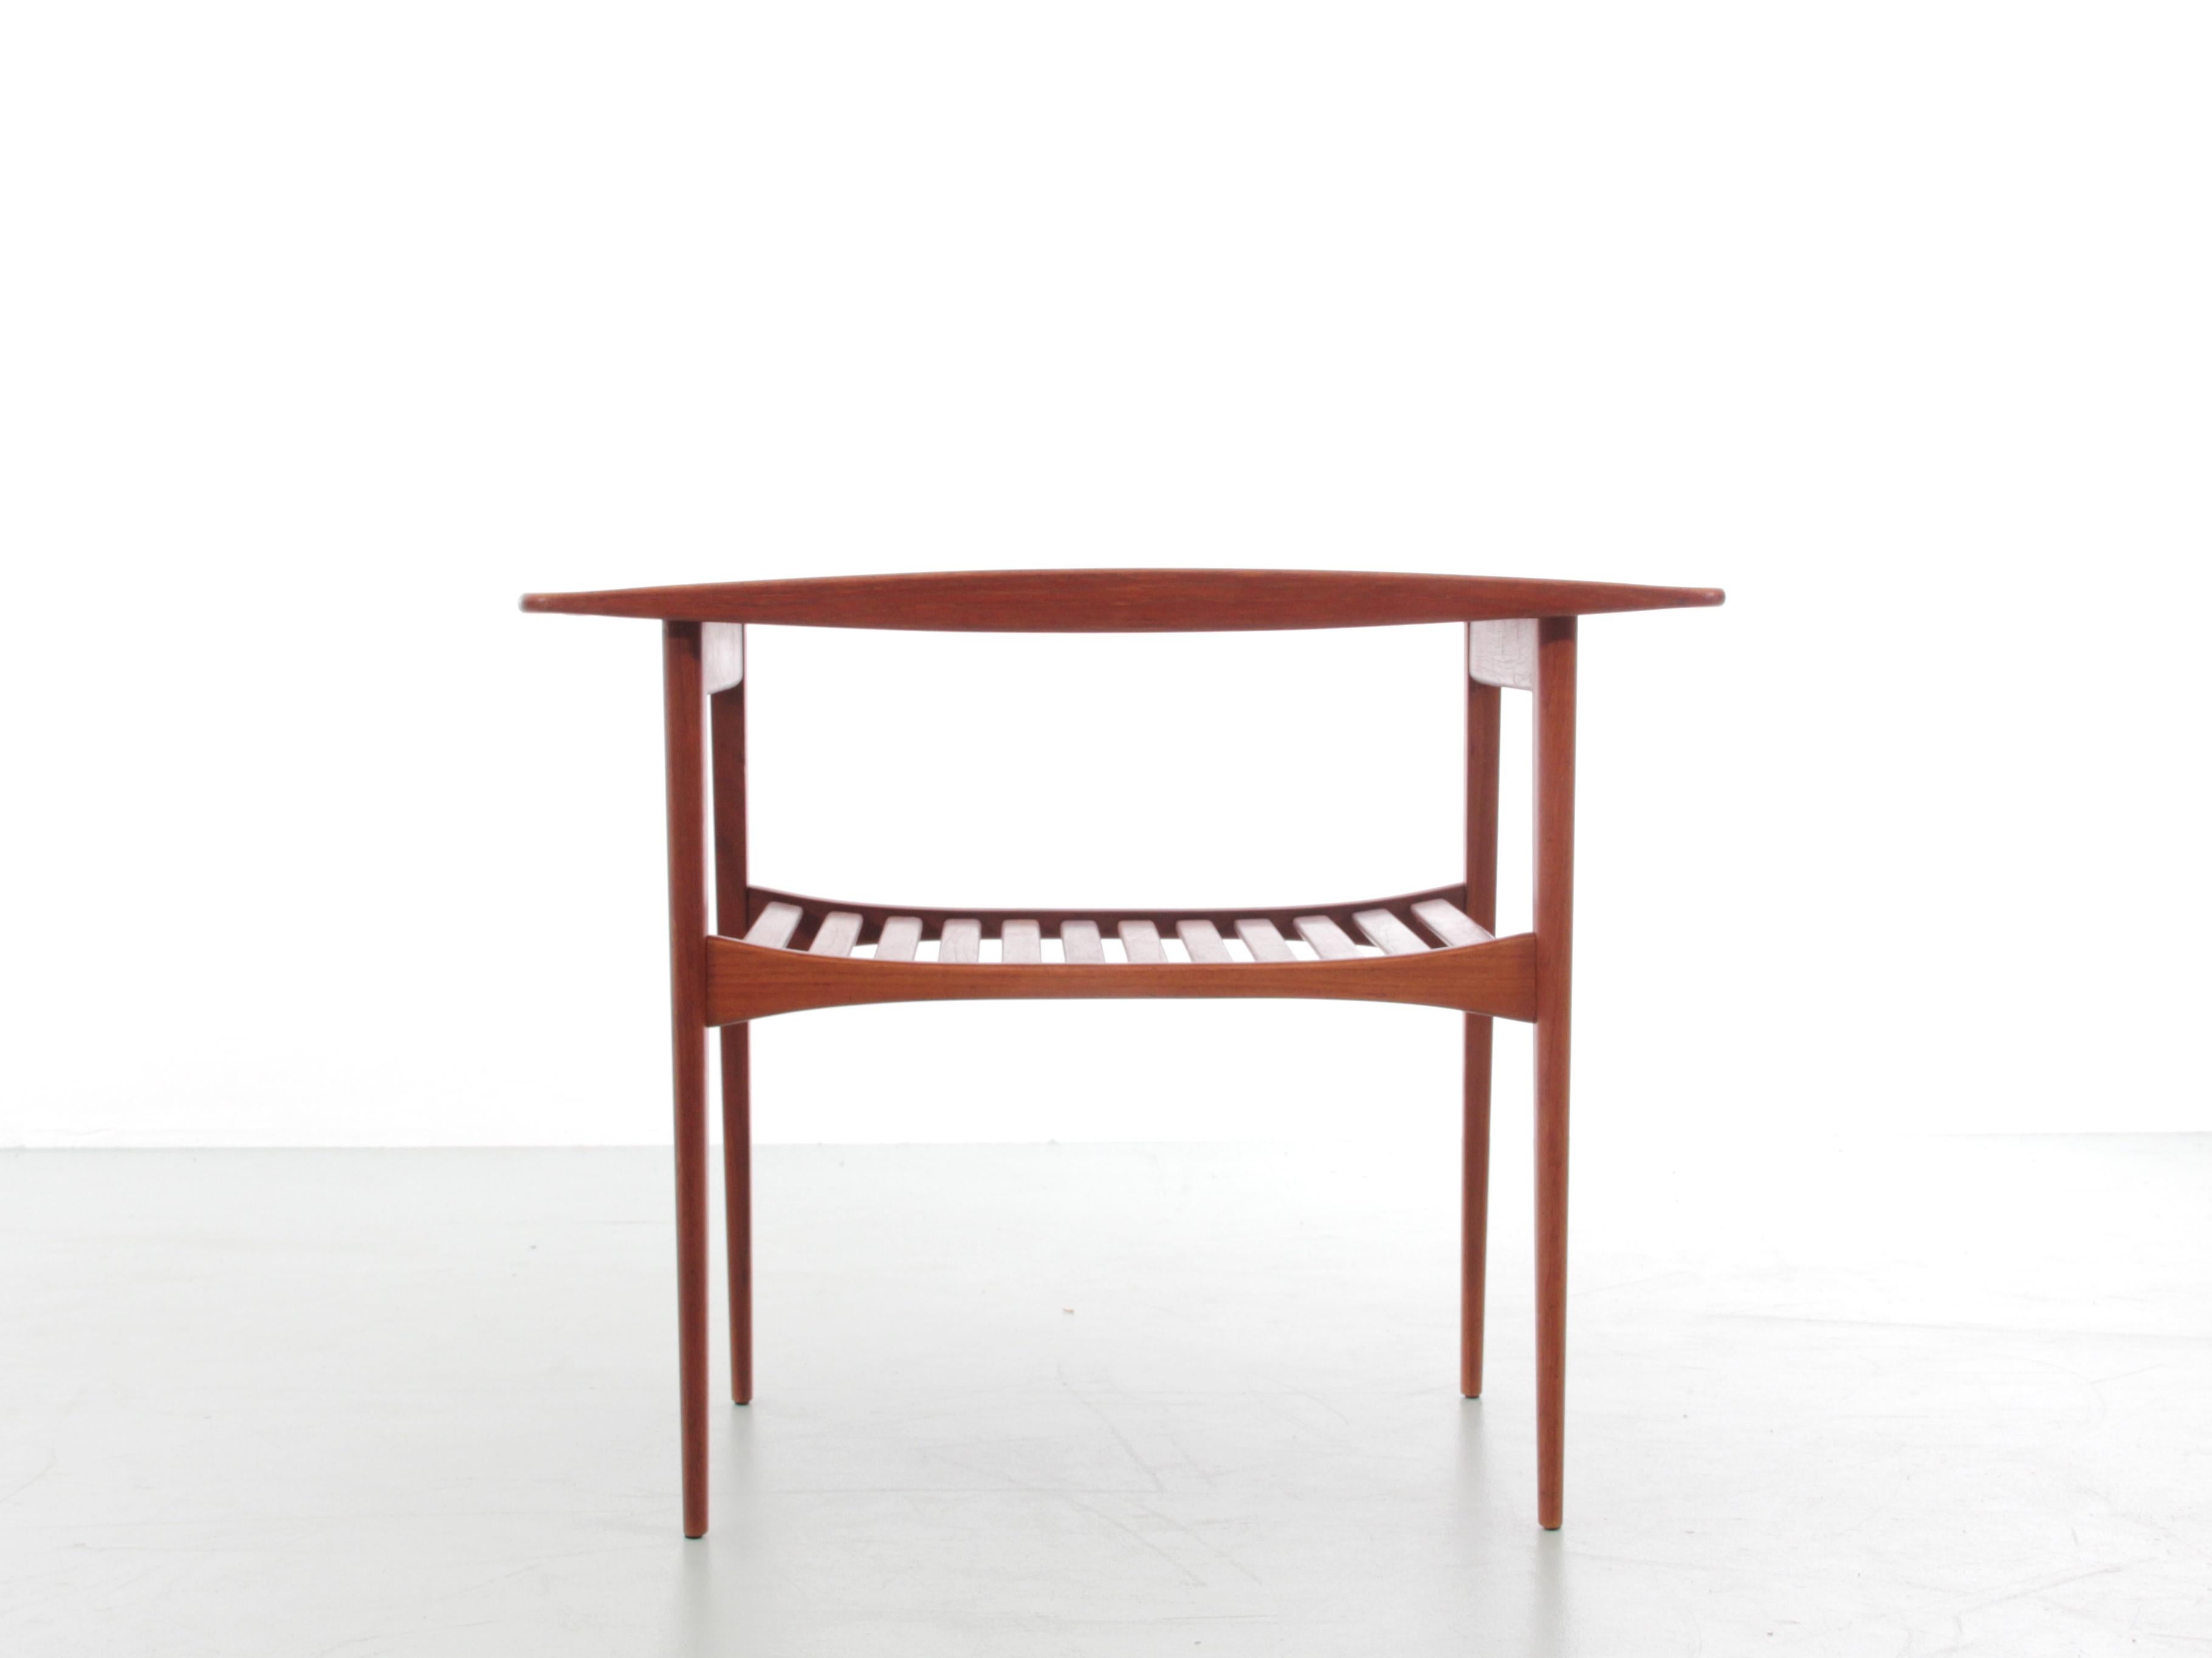 Mid-Century Modern side table in solid teak by Tove and Edvard Kindt-Larsen model FD 510. Referenced by the Design Museum Danmark under number RP15840.